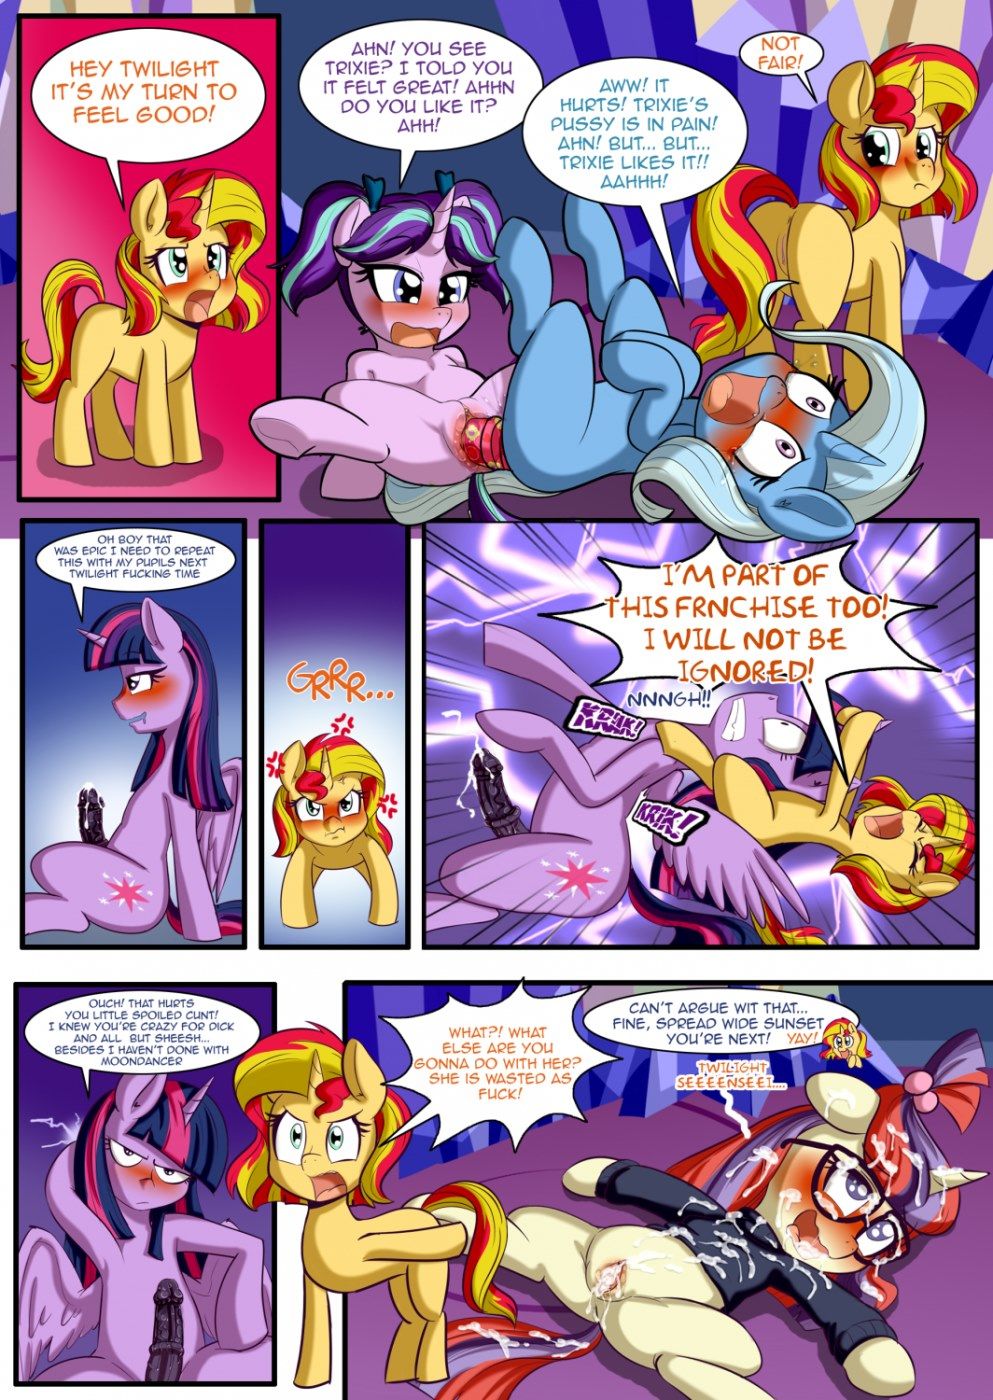 Back to Magic Kindergarten - Little Pony page 9